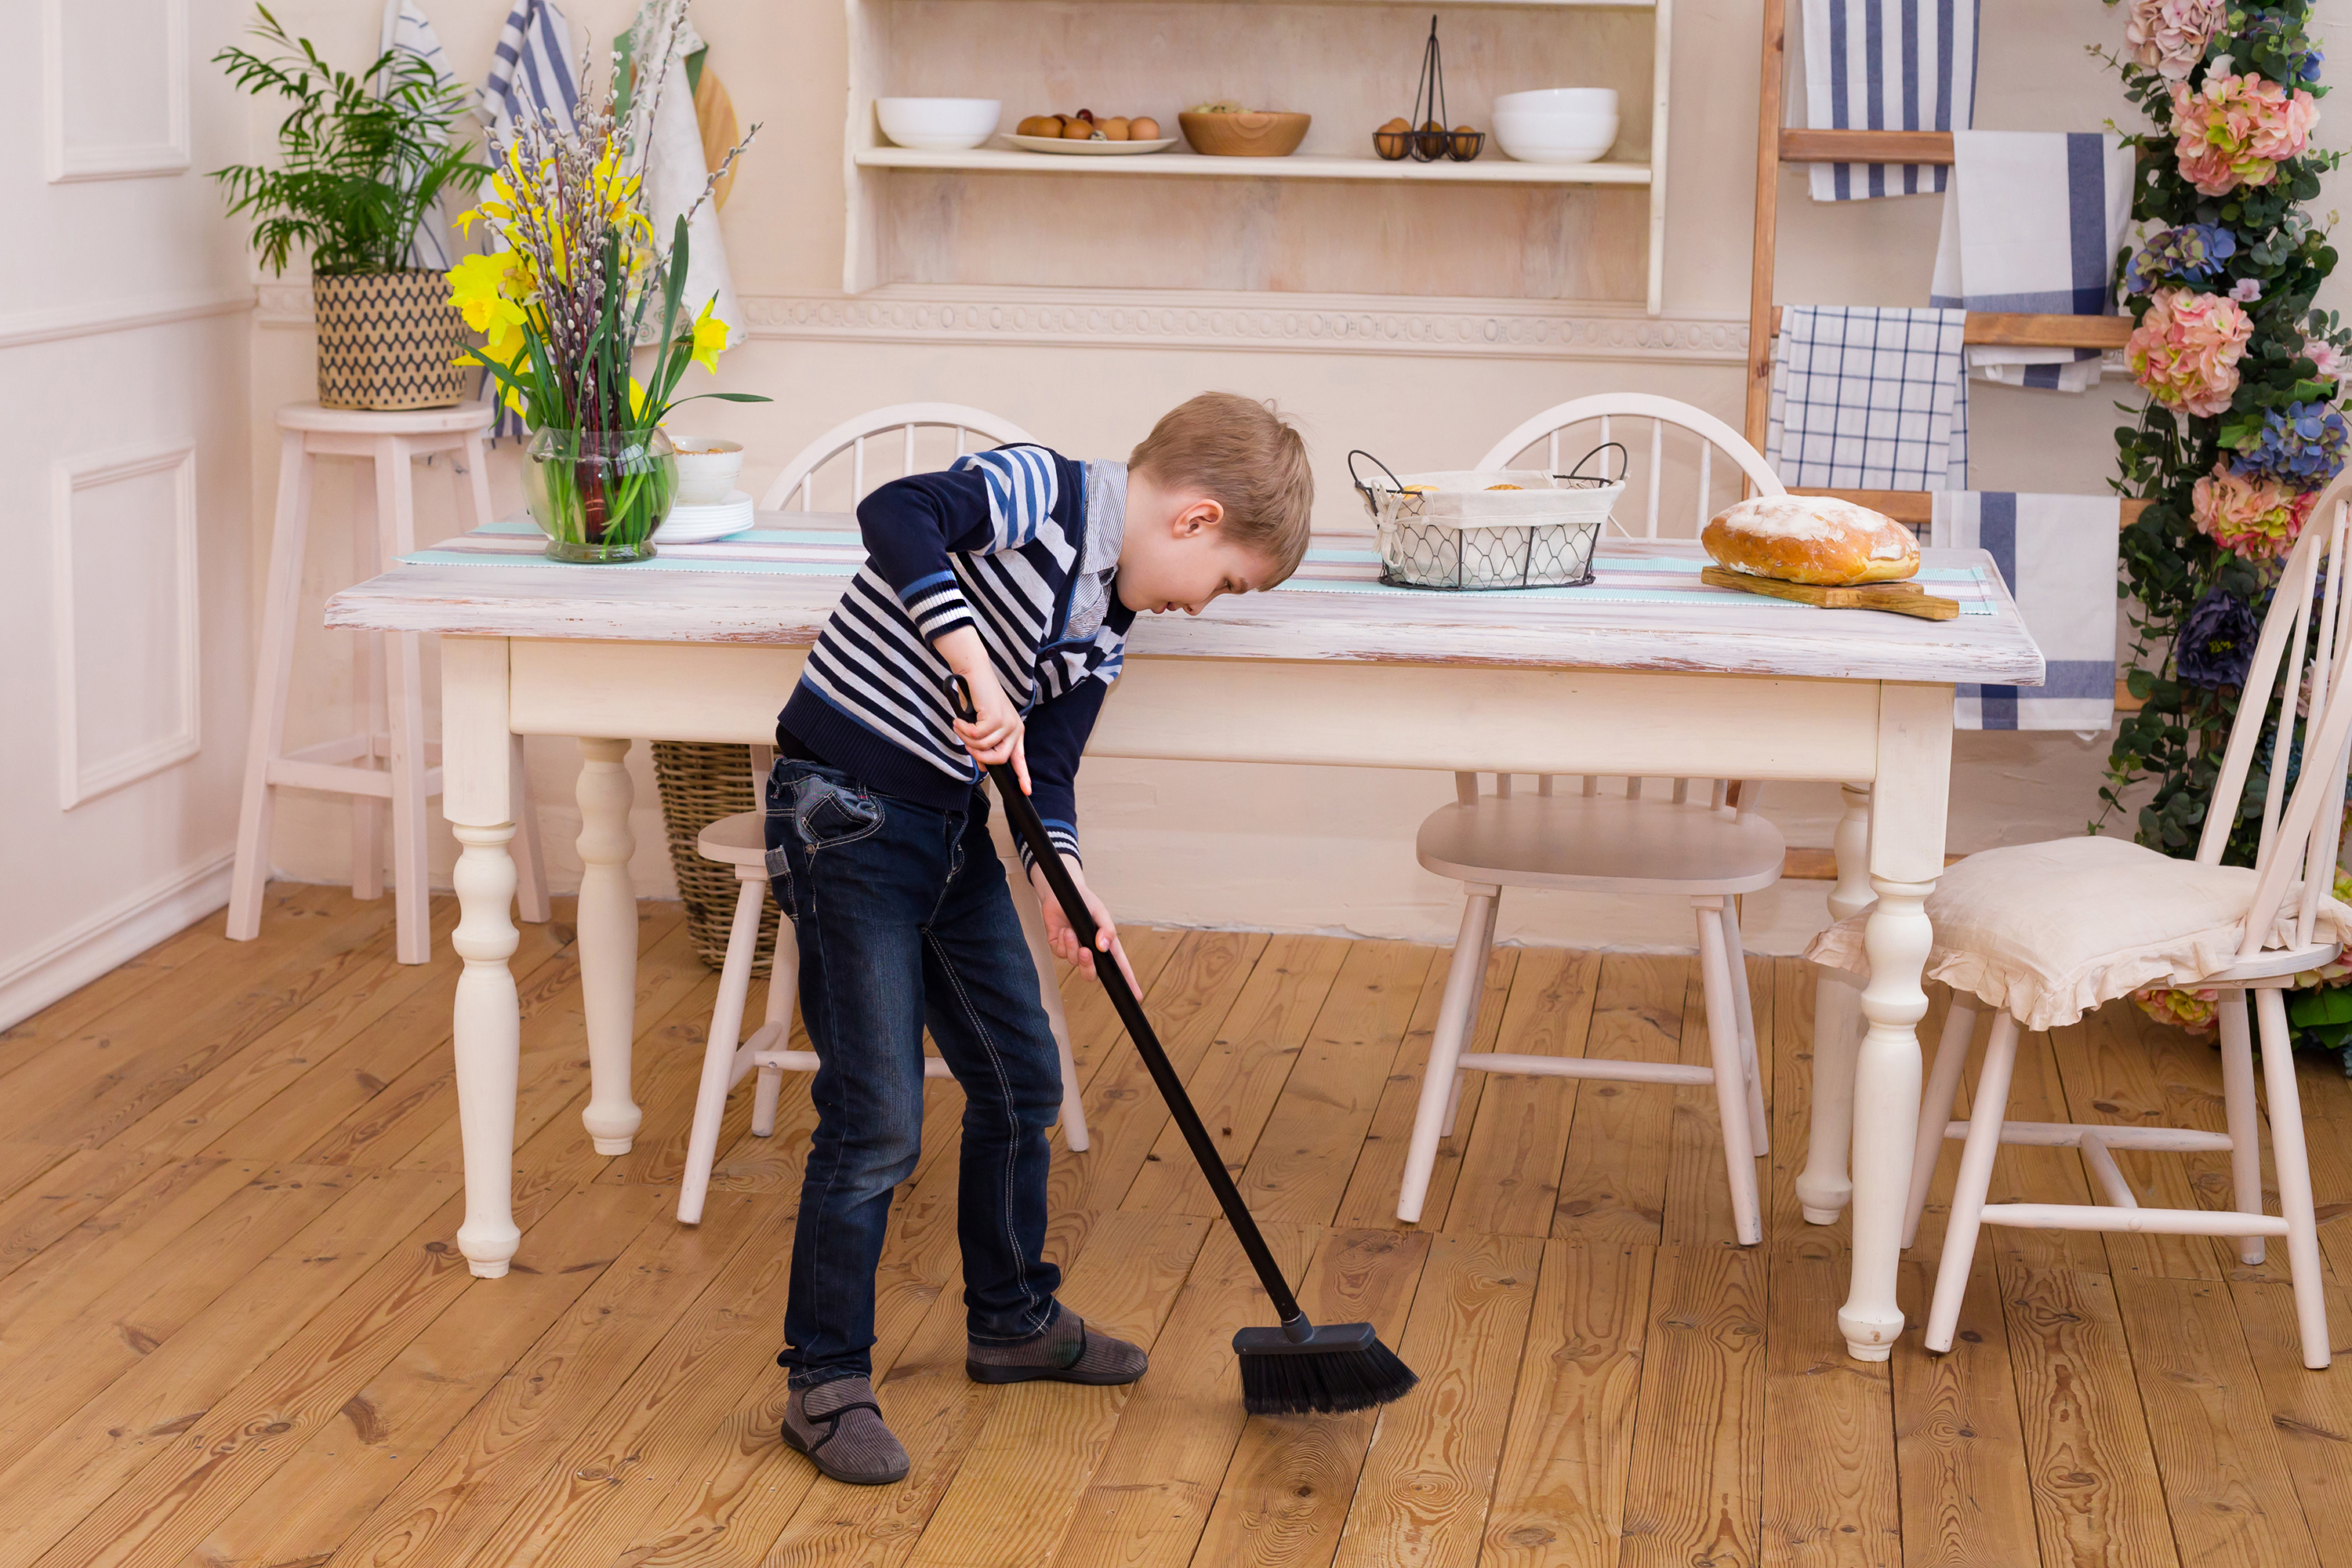 A young boy sweeping | Source: Shutterstock